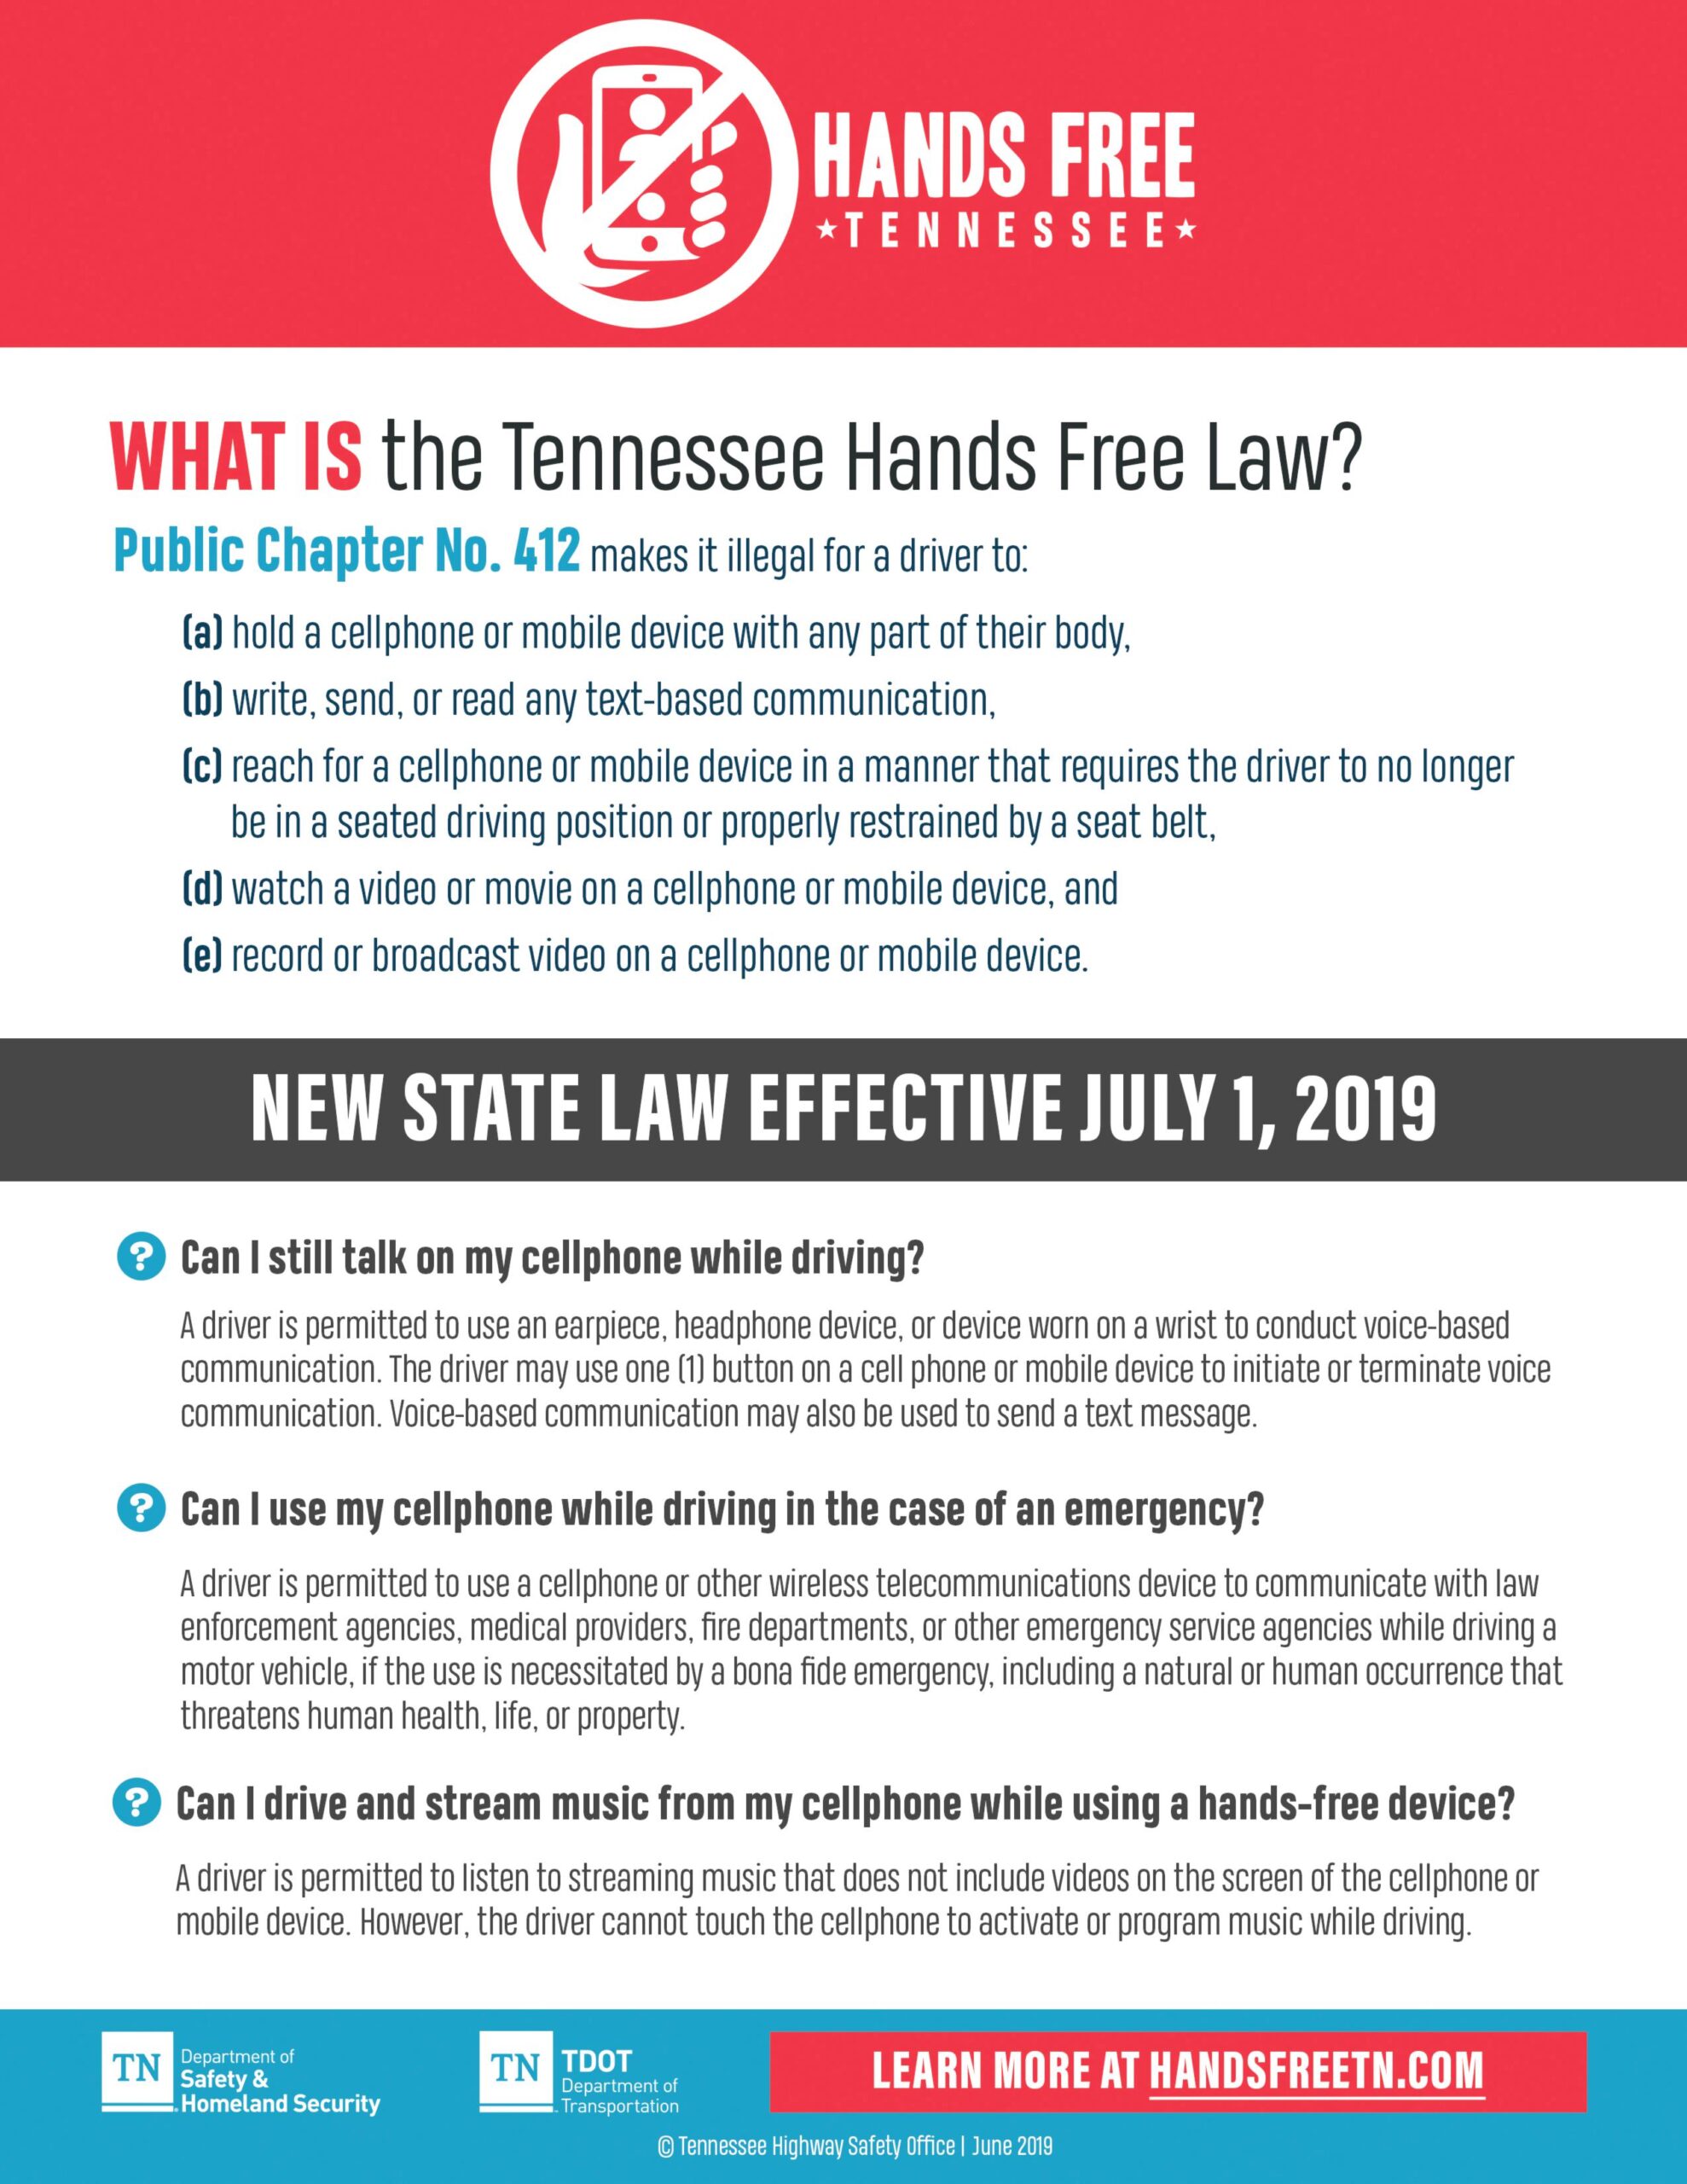 New Law Means TN Drivers Will Face Increased Restrictions on Cell Phone Usage